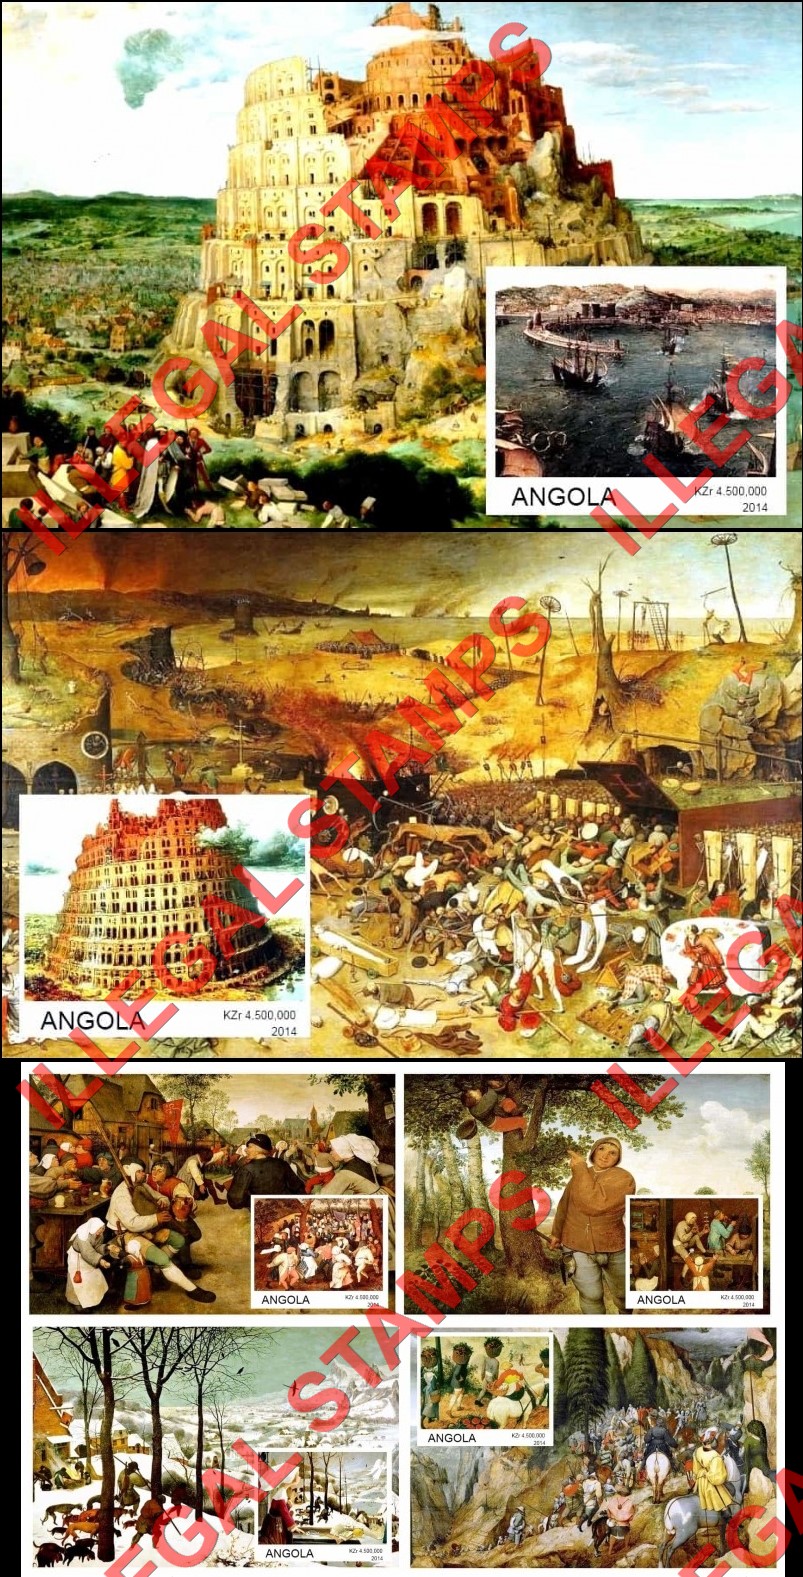 Angola 2014 Paintings by Peter Bruegel Illegal Stamp Souvenir Sheets of 1 (Part 1)